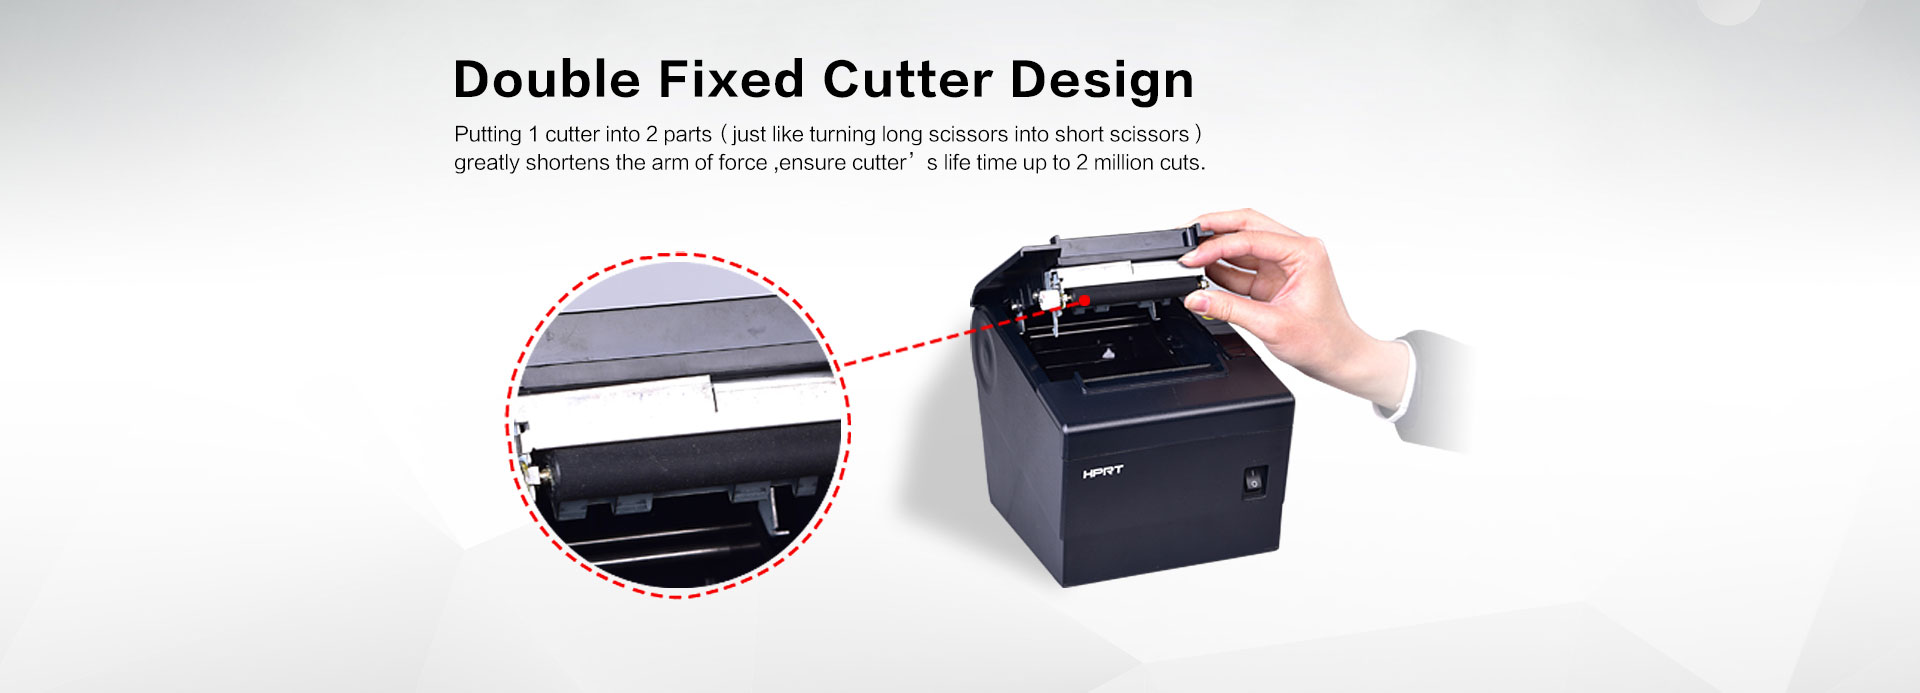 POS printer TP806 double fixed cutter